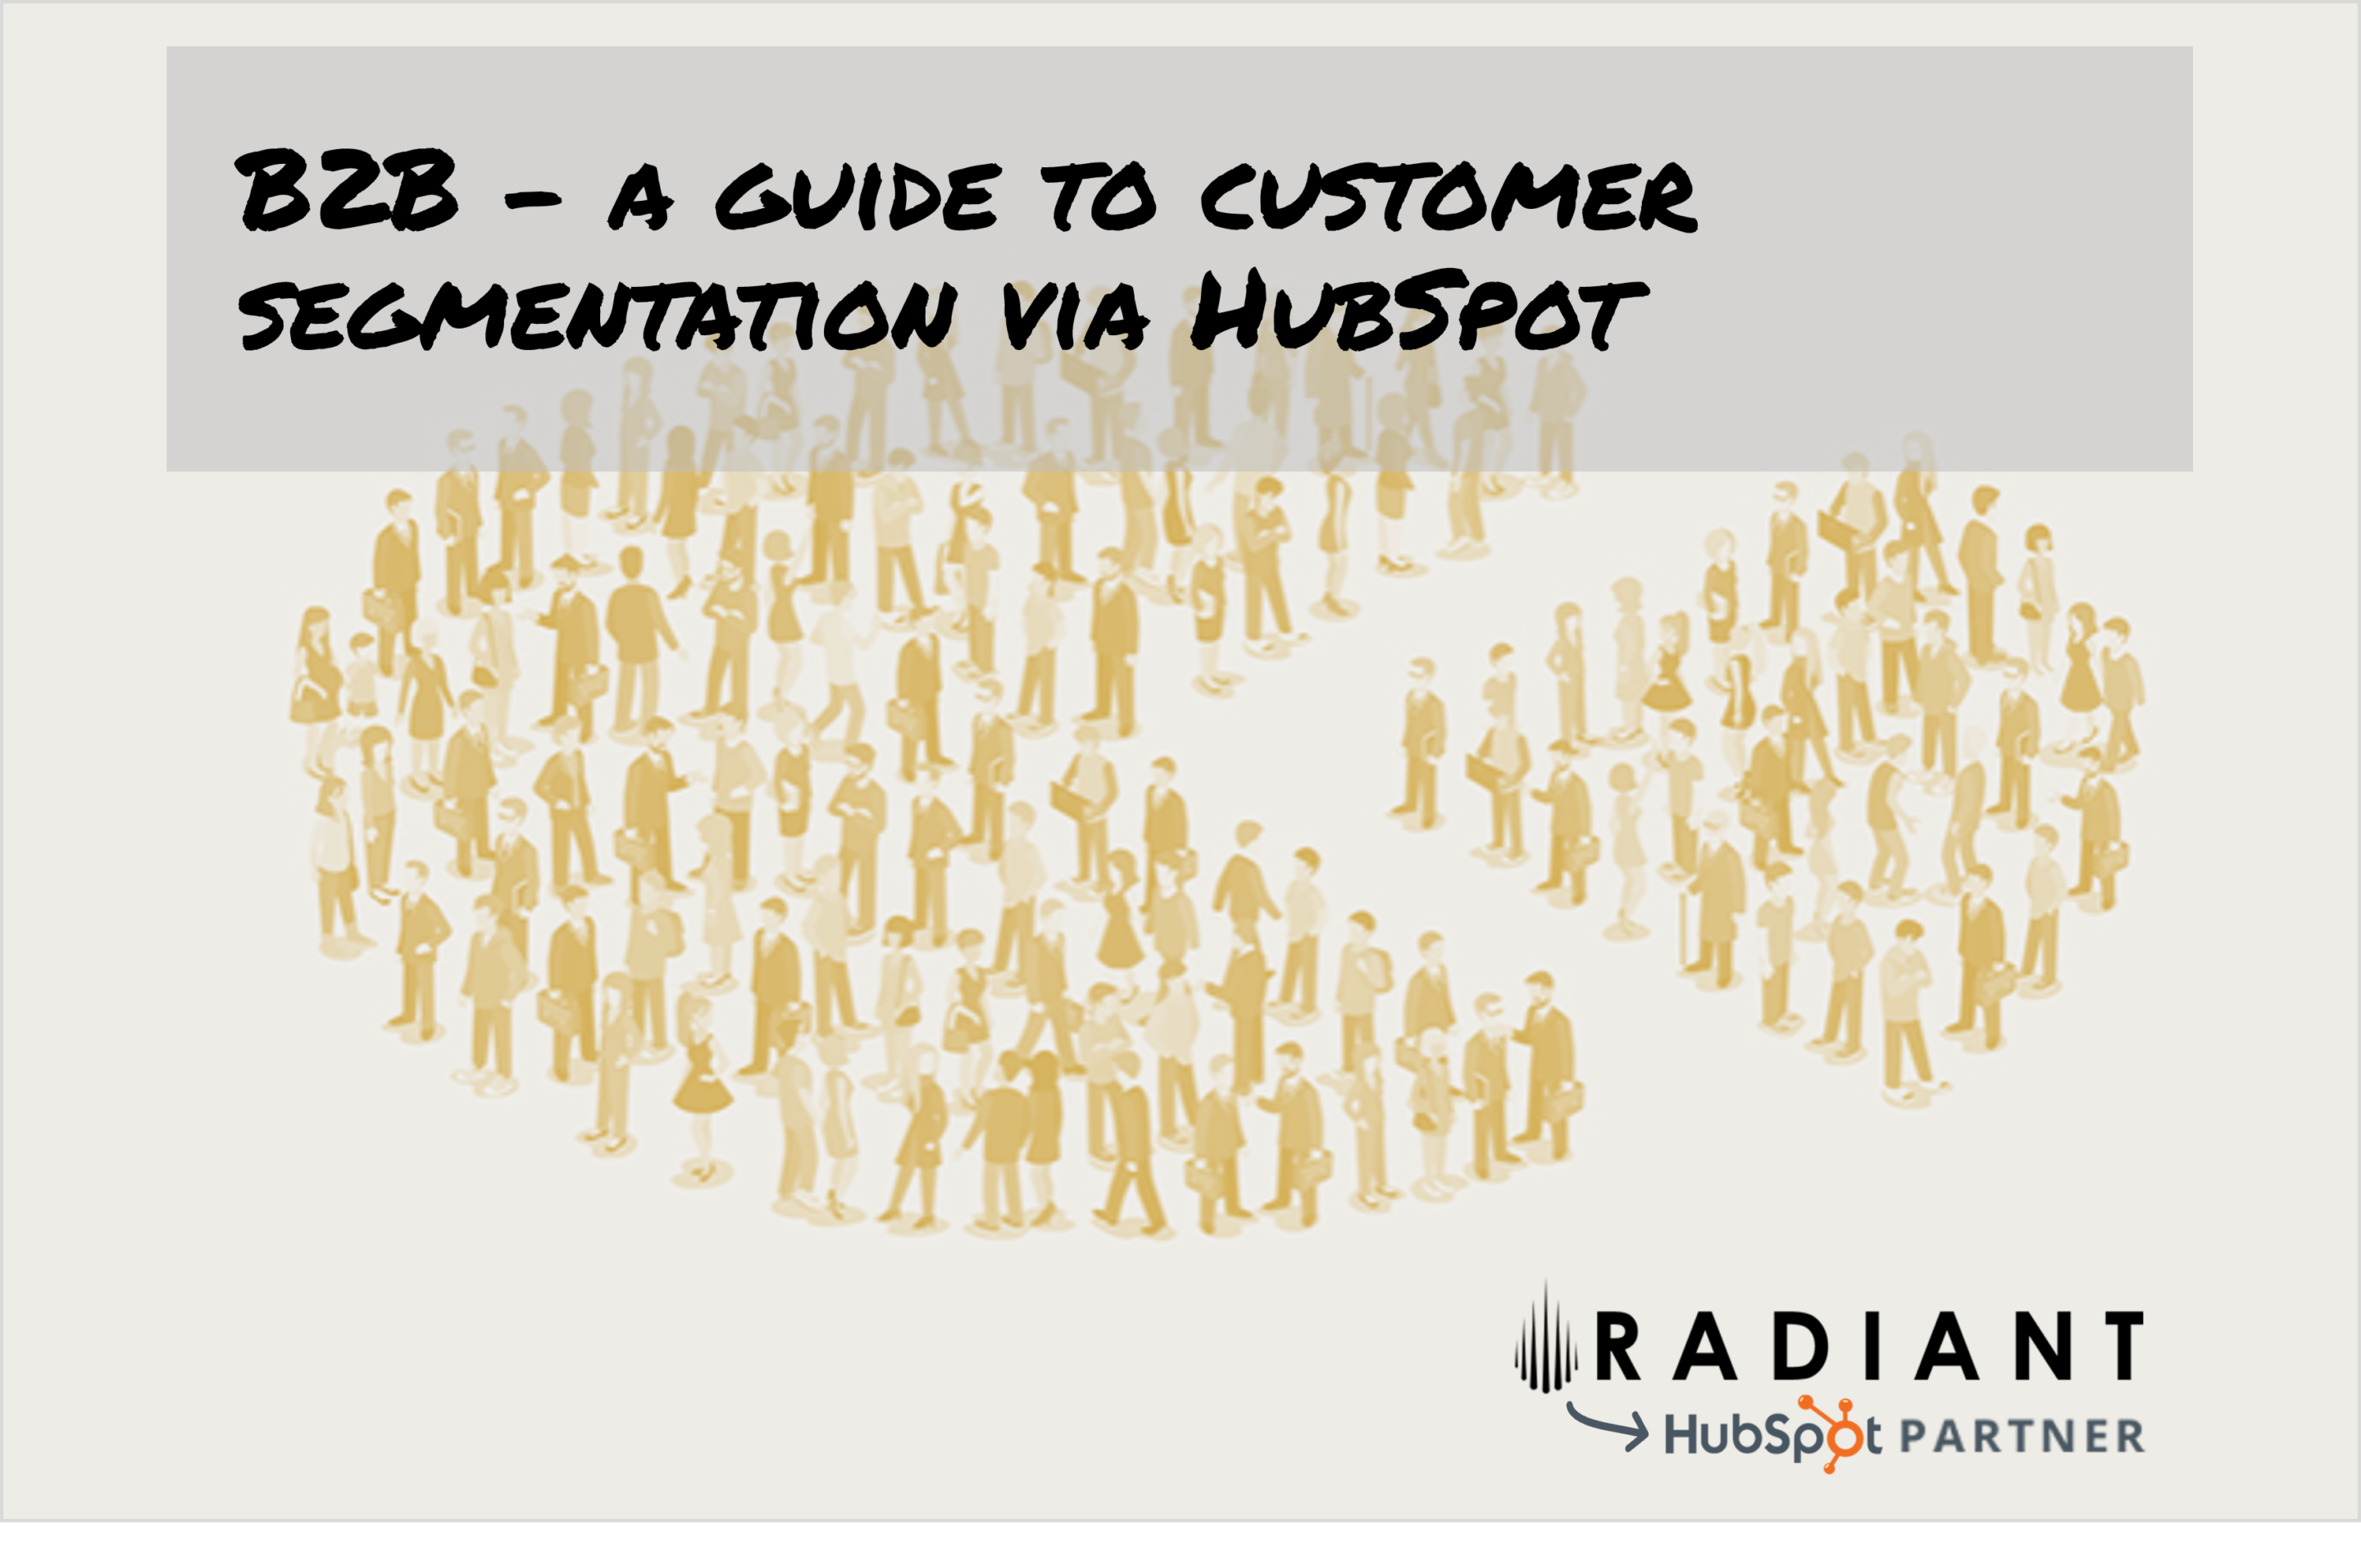 Use customer lists in HubSpot as a segmentation tool by Radiant using Vainu and Lasso X integrated into HubSpot